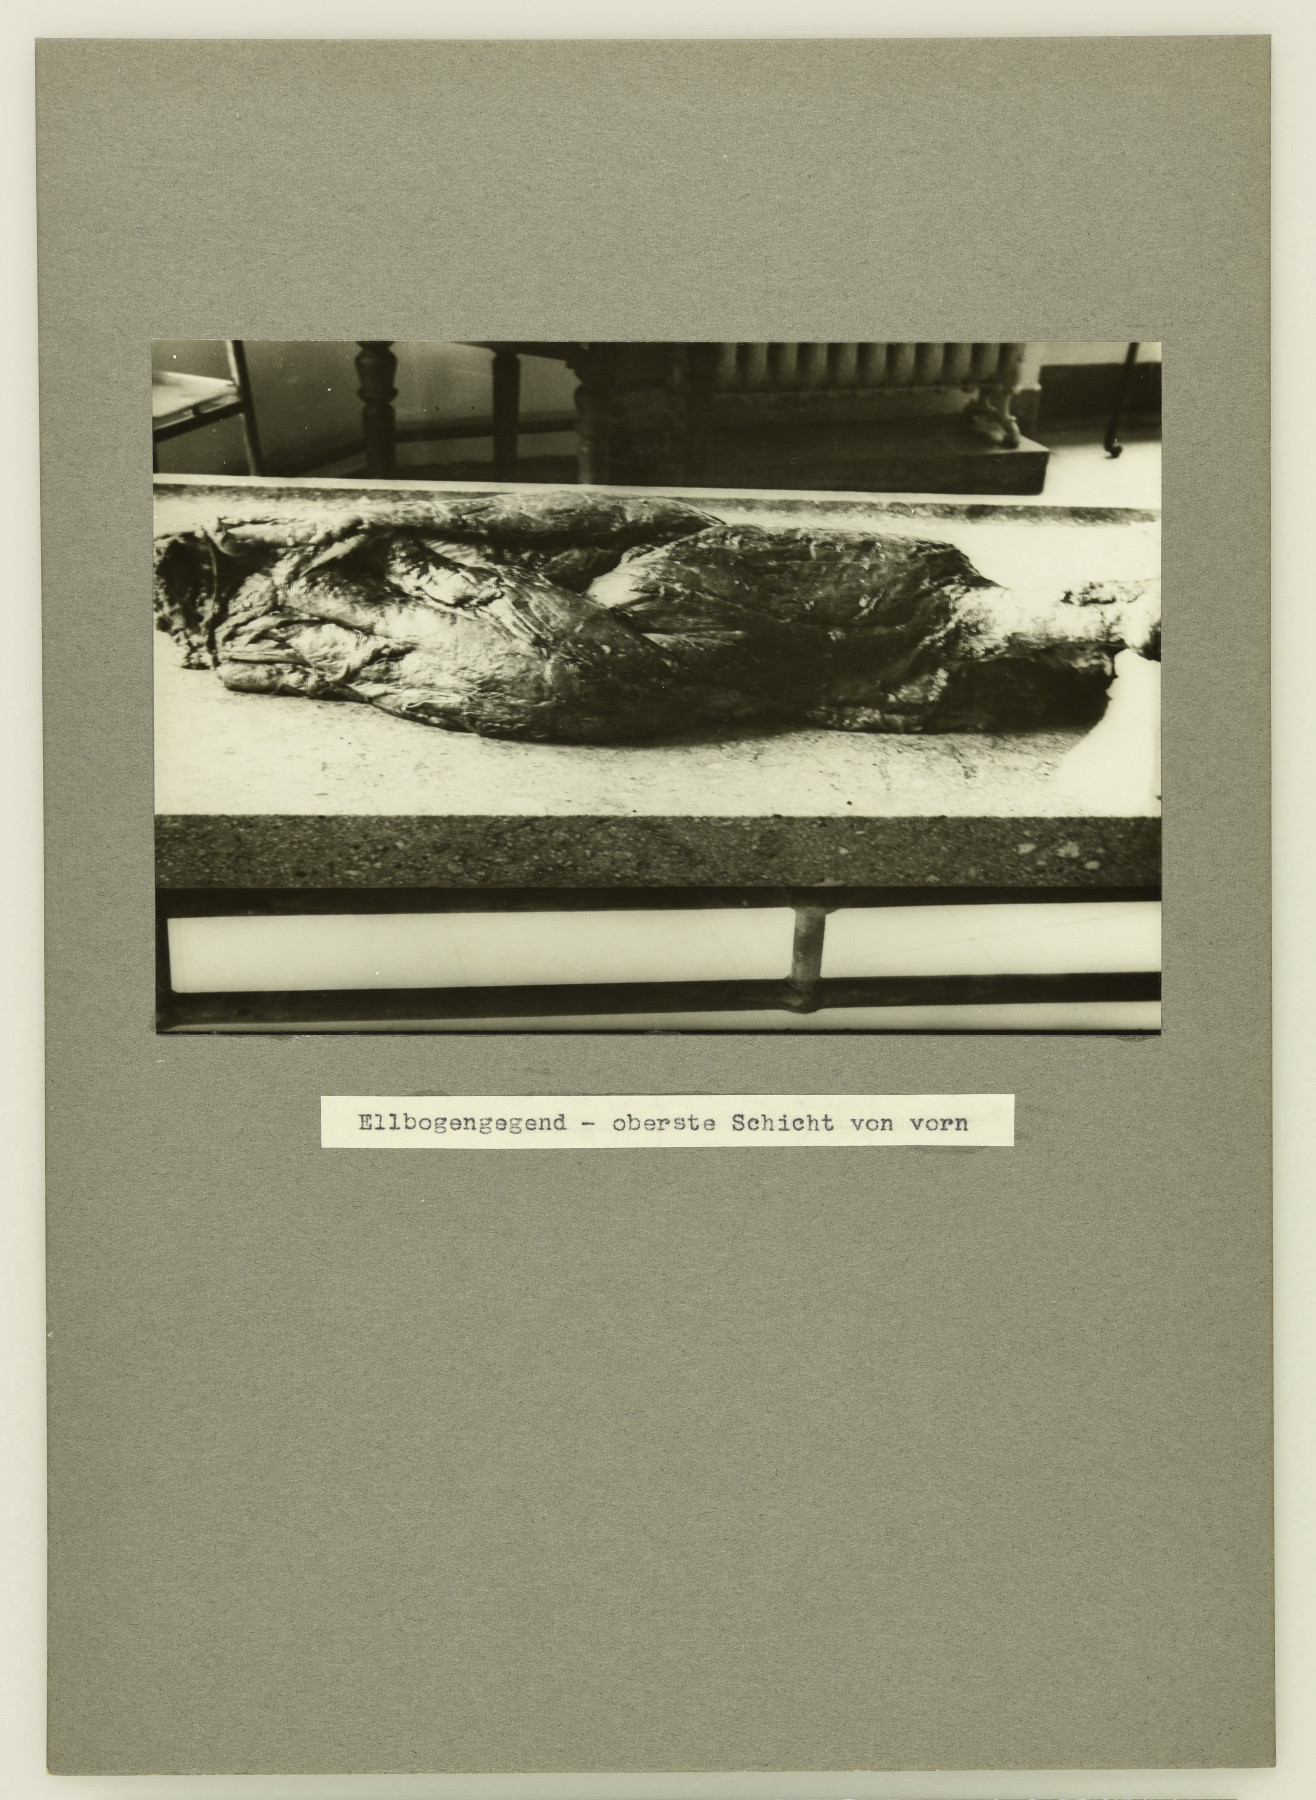 Black-and-white close-up of a piece of tissue on a stretcher in a room; in the background part of a heater is visible. It is a piece of "Bobby" the gorilla's arm that has been removed from his body and now has its muscles exposed. The photo has been stuck to a piece of grey cardboard and bears a typewritten caption: "Elbow – top layer from the front"